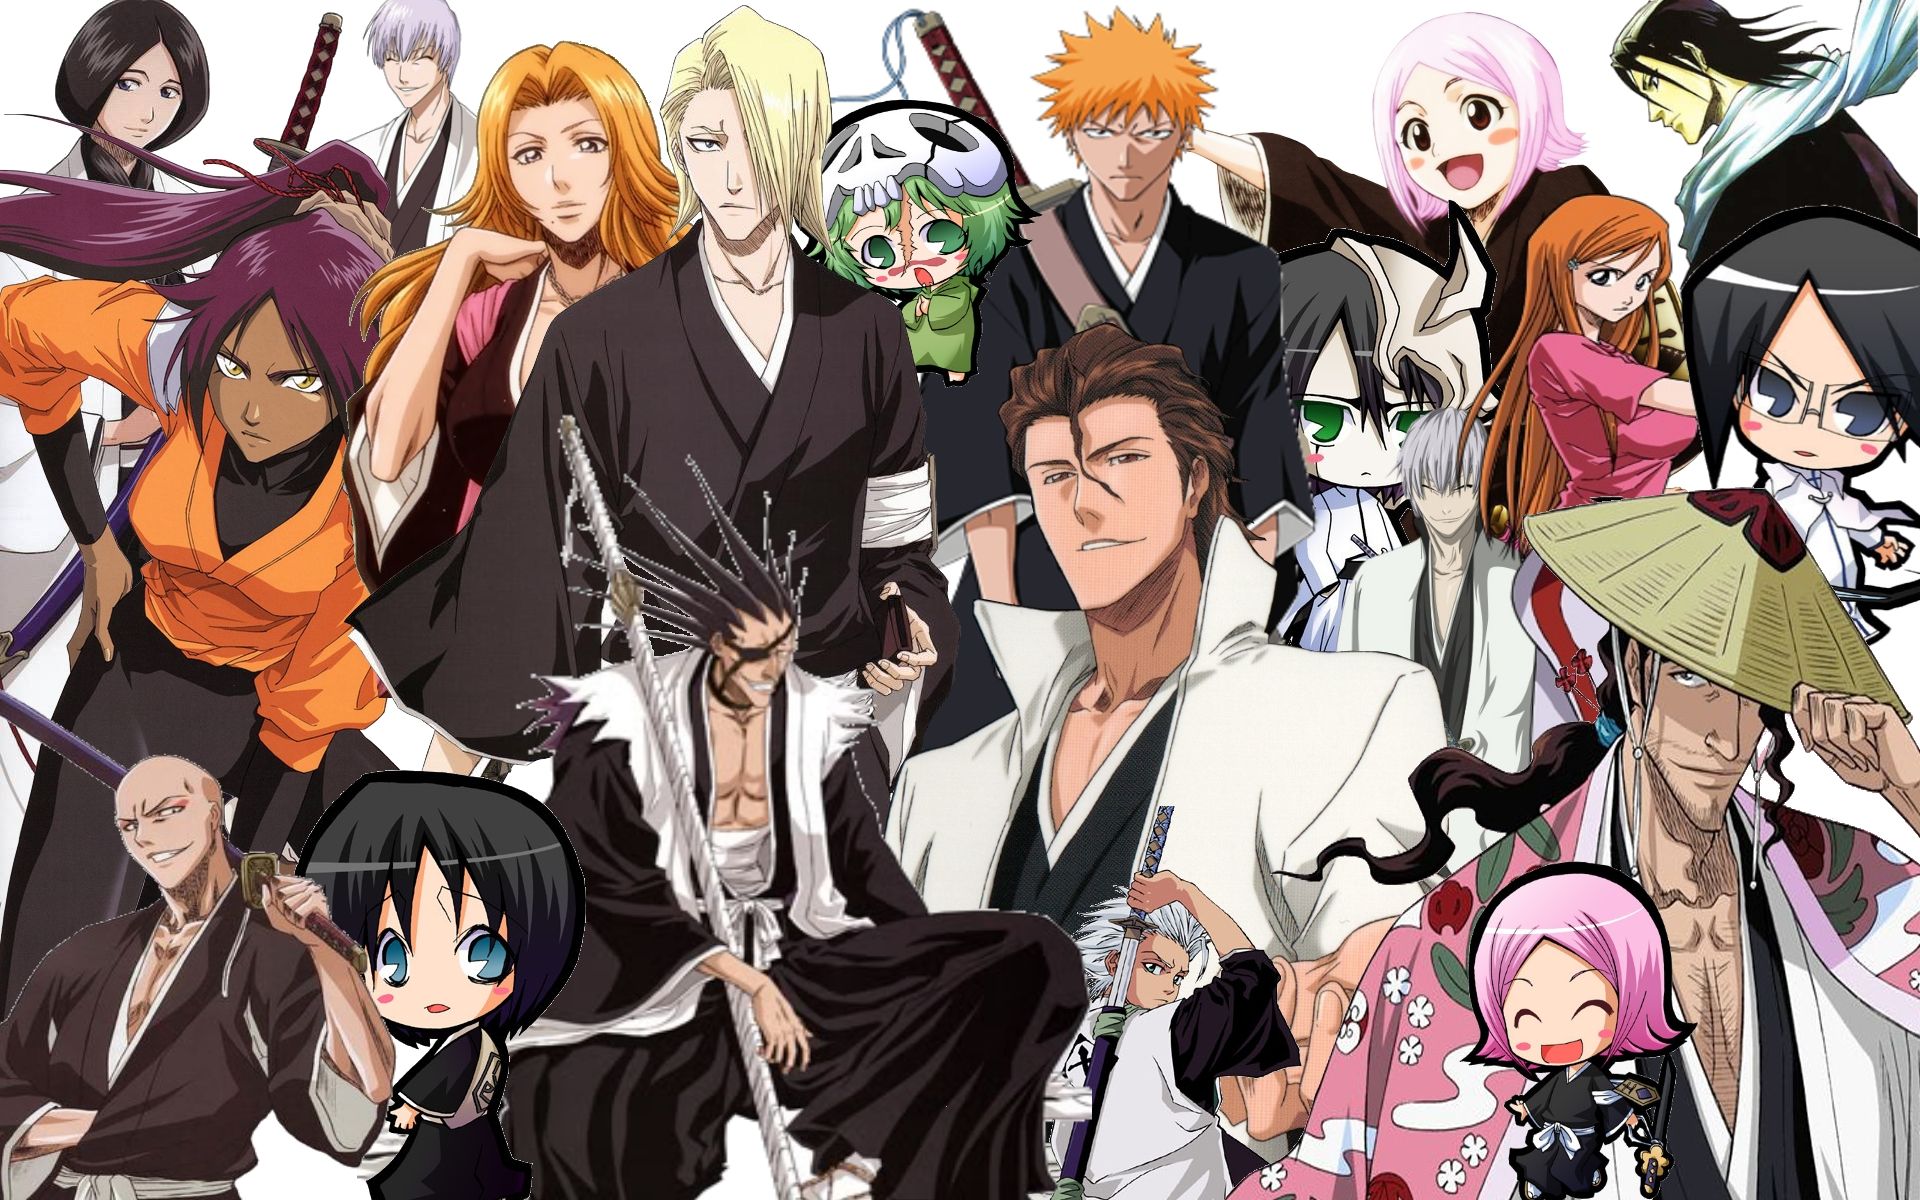 Bleach Collage Wallpaper 2 by superzproductions on DeviantArt